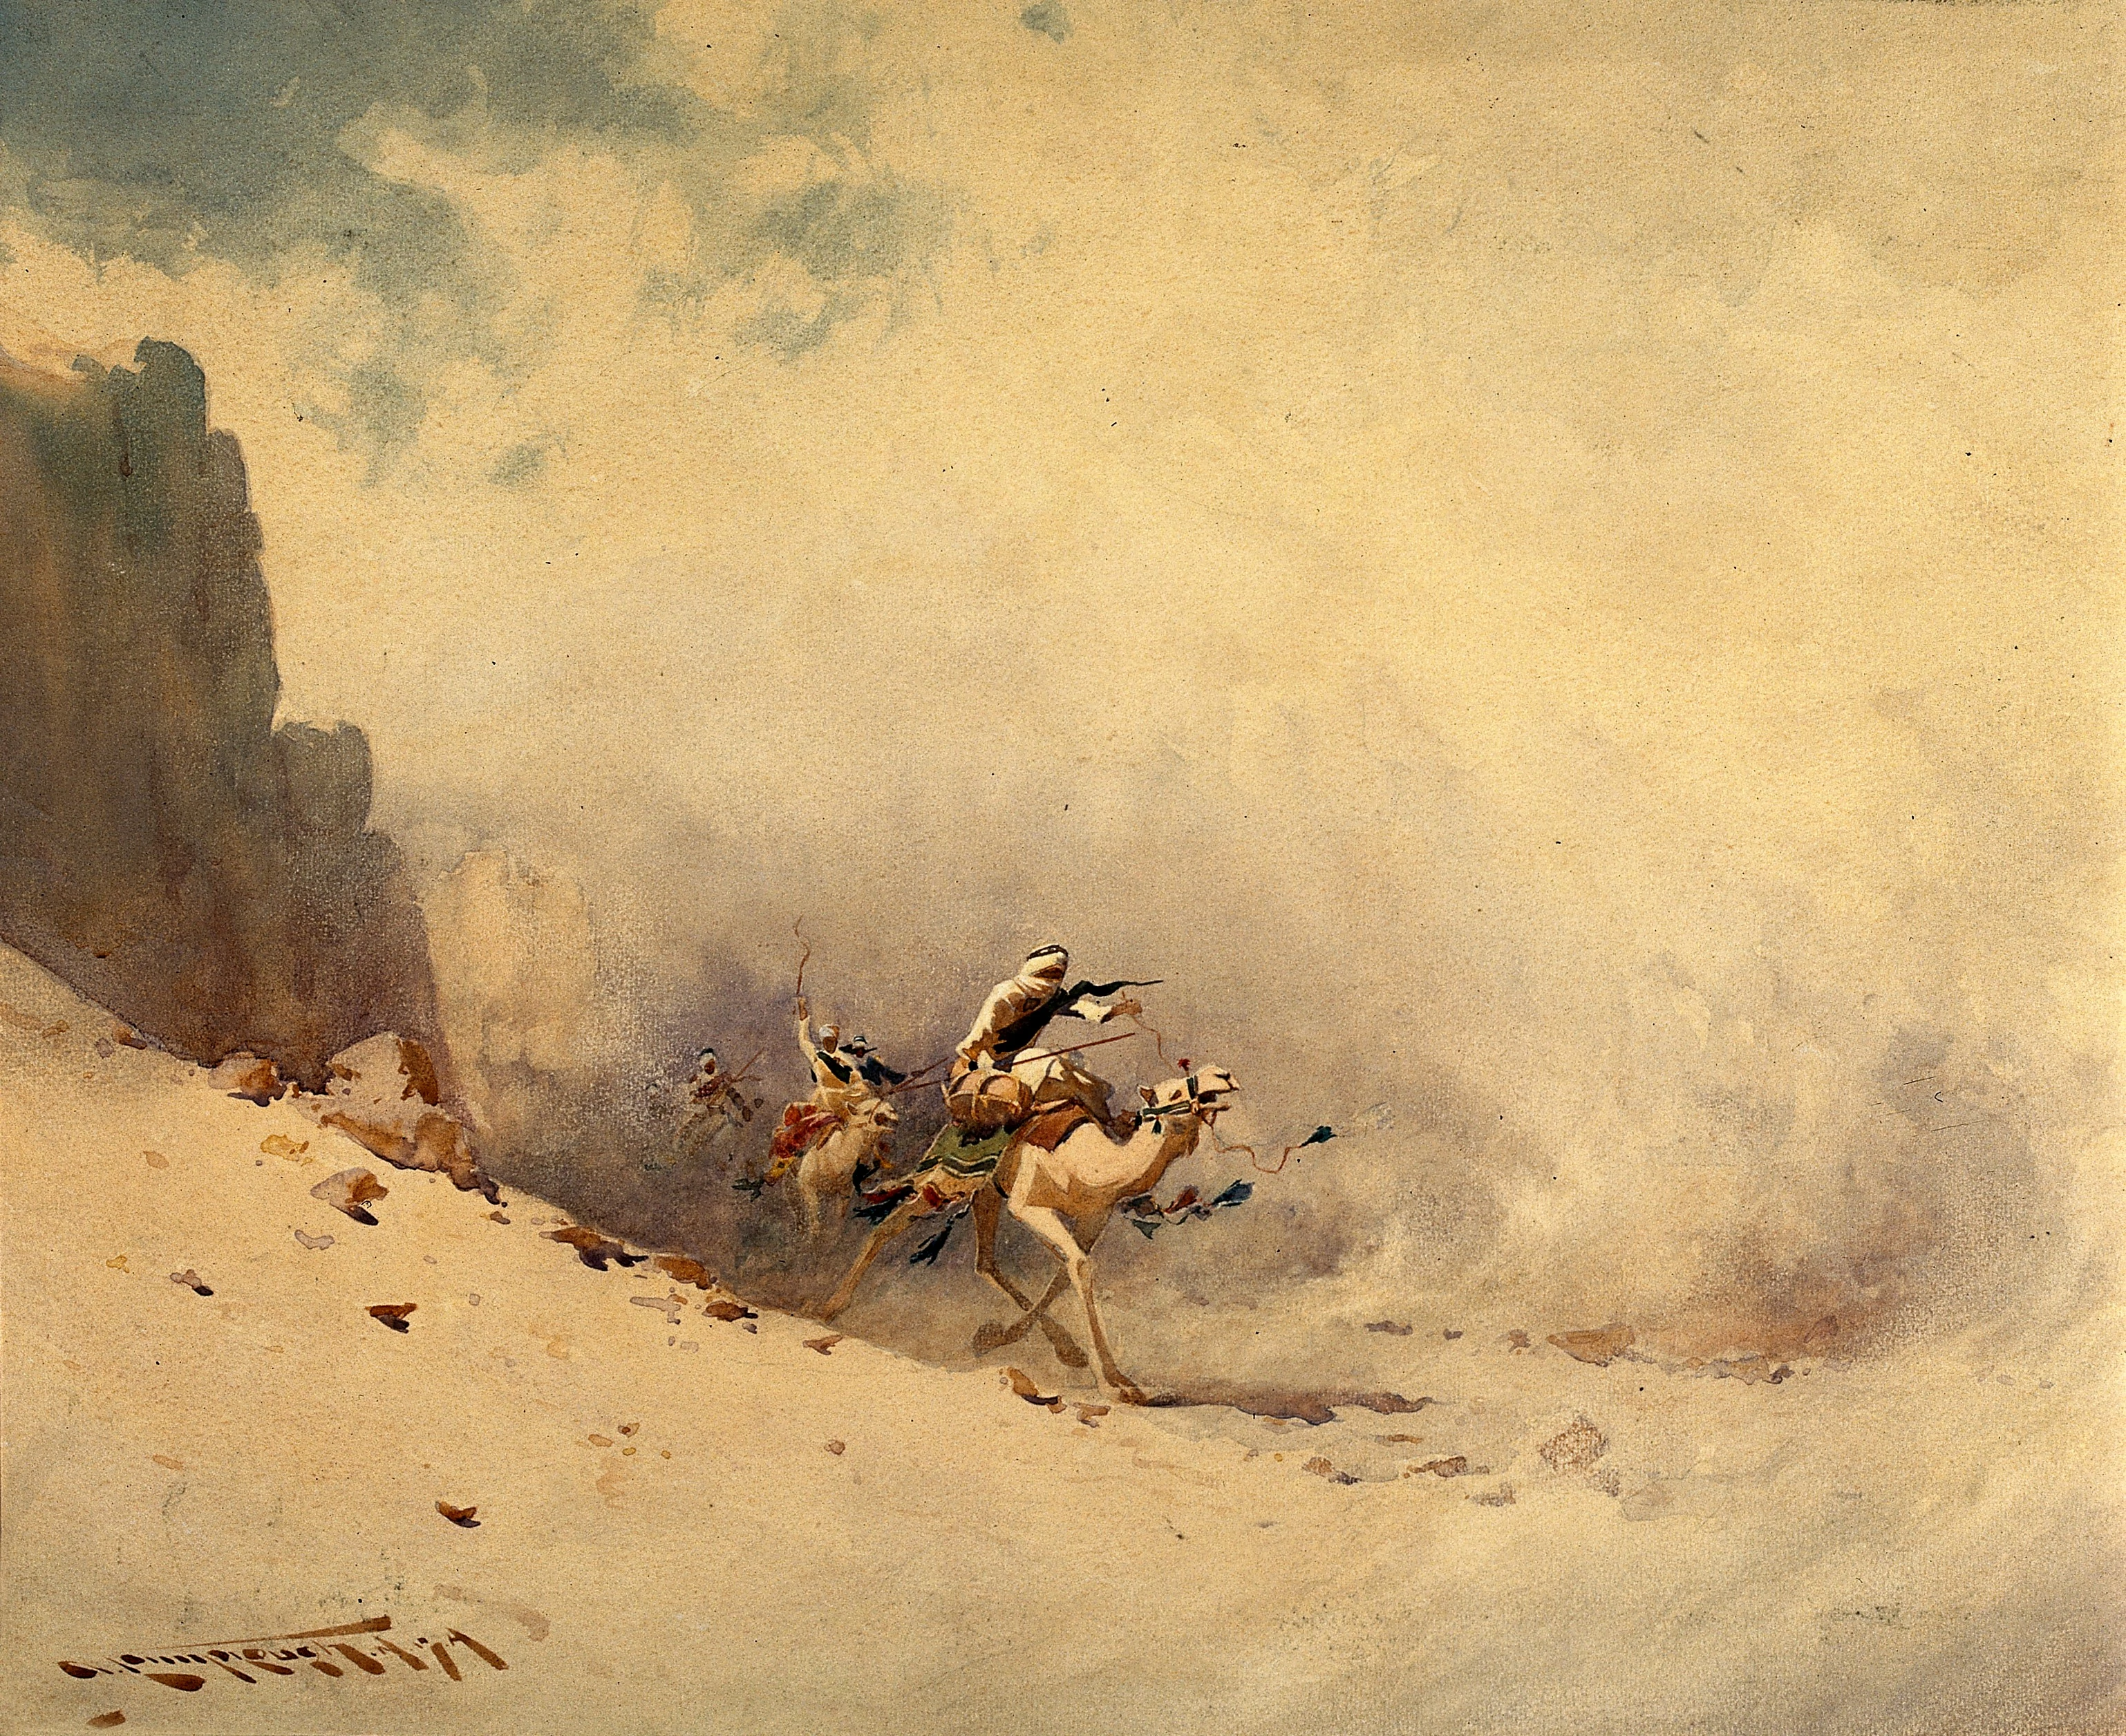 Man riding a camel in the desert during a sand storm, Augustus Osborne Lamplough